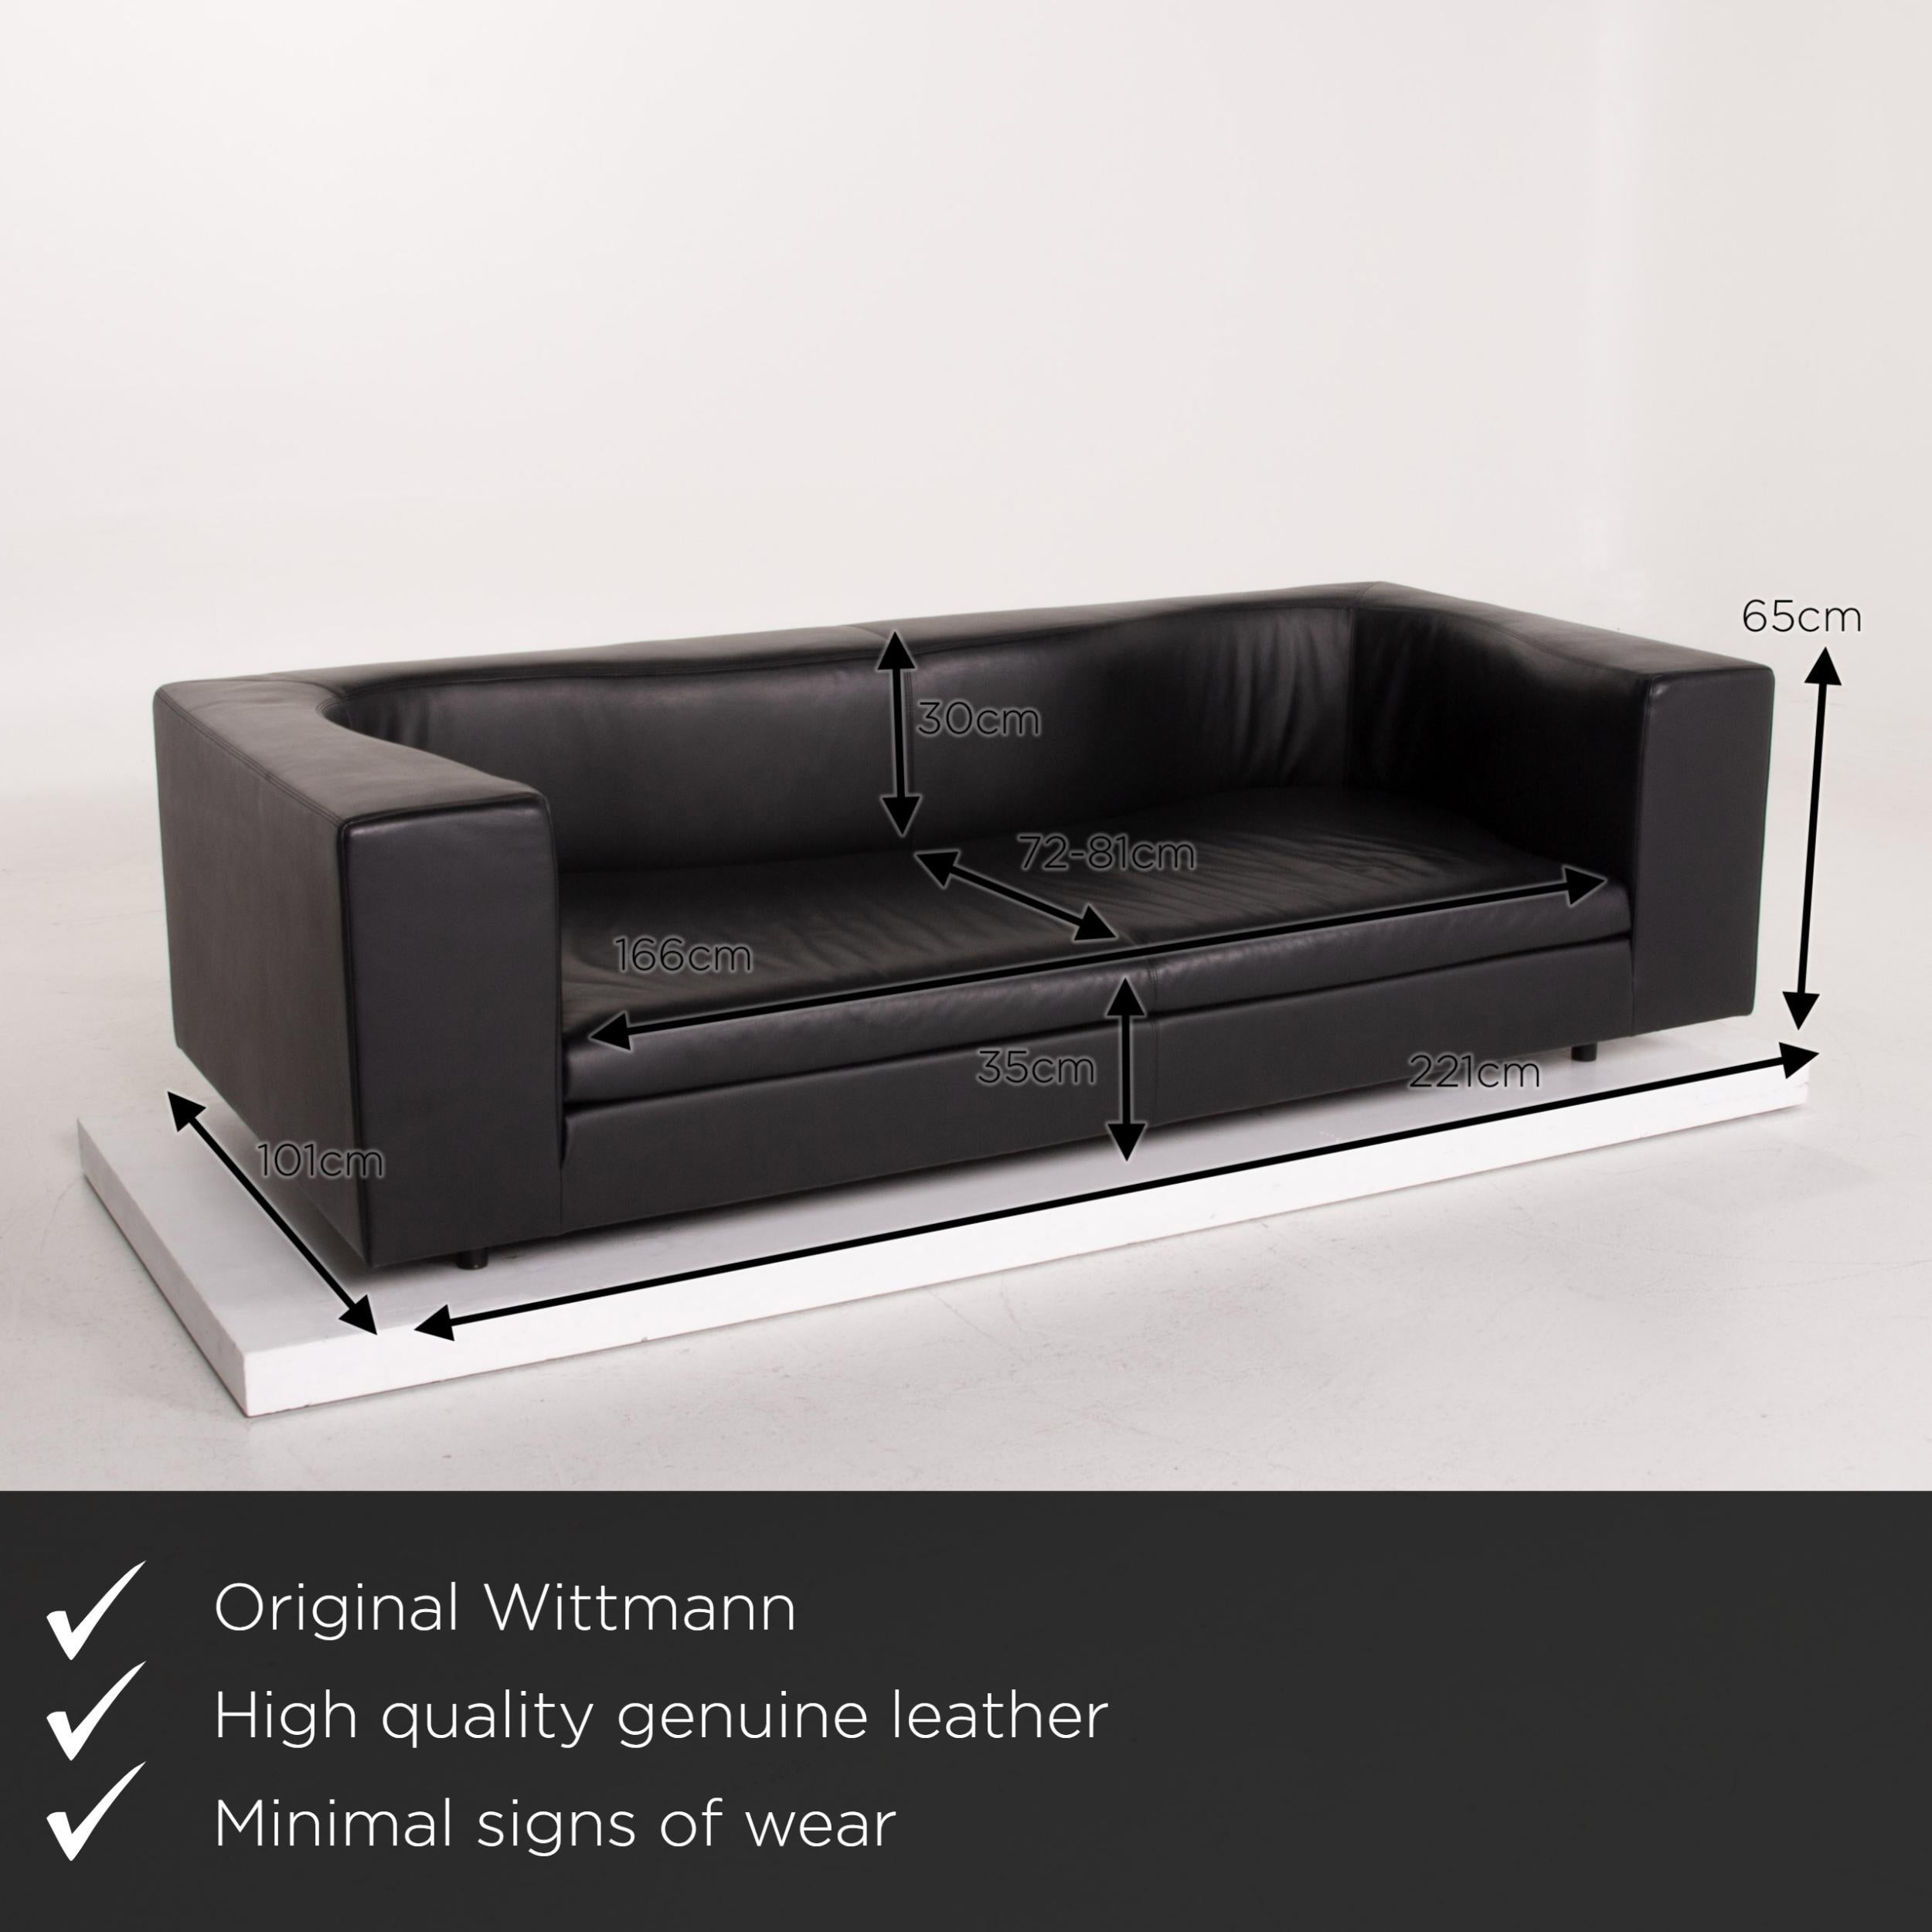 We present to you a Wittmann leather sofa black three-seat.

 

 Product measurements in centimeters:
 

Depth 101
Width 221
Height 65
Seat height 35
Rest height 65
Seat depth 72
Seat width 166
Back height 30.